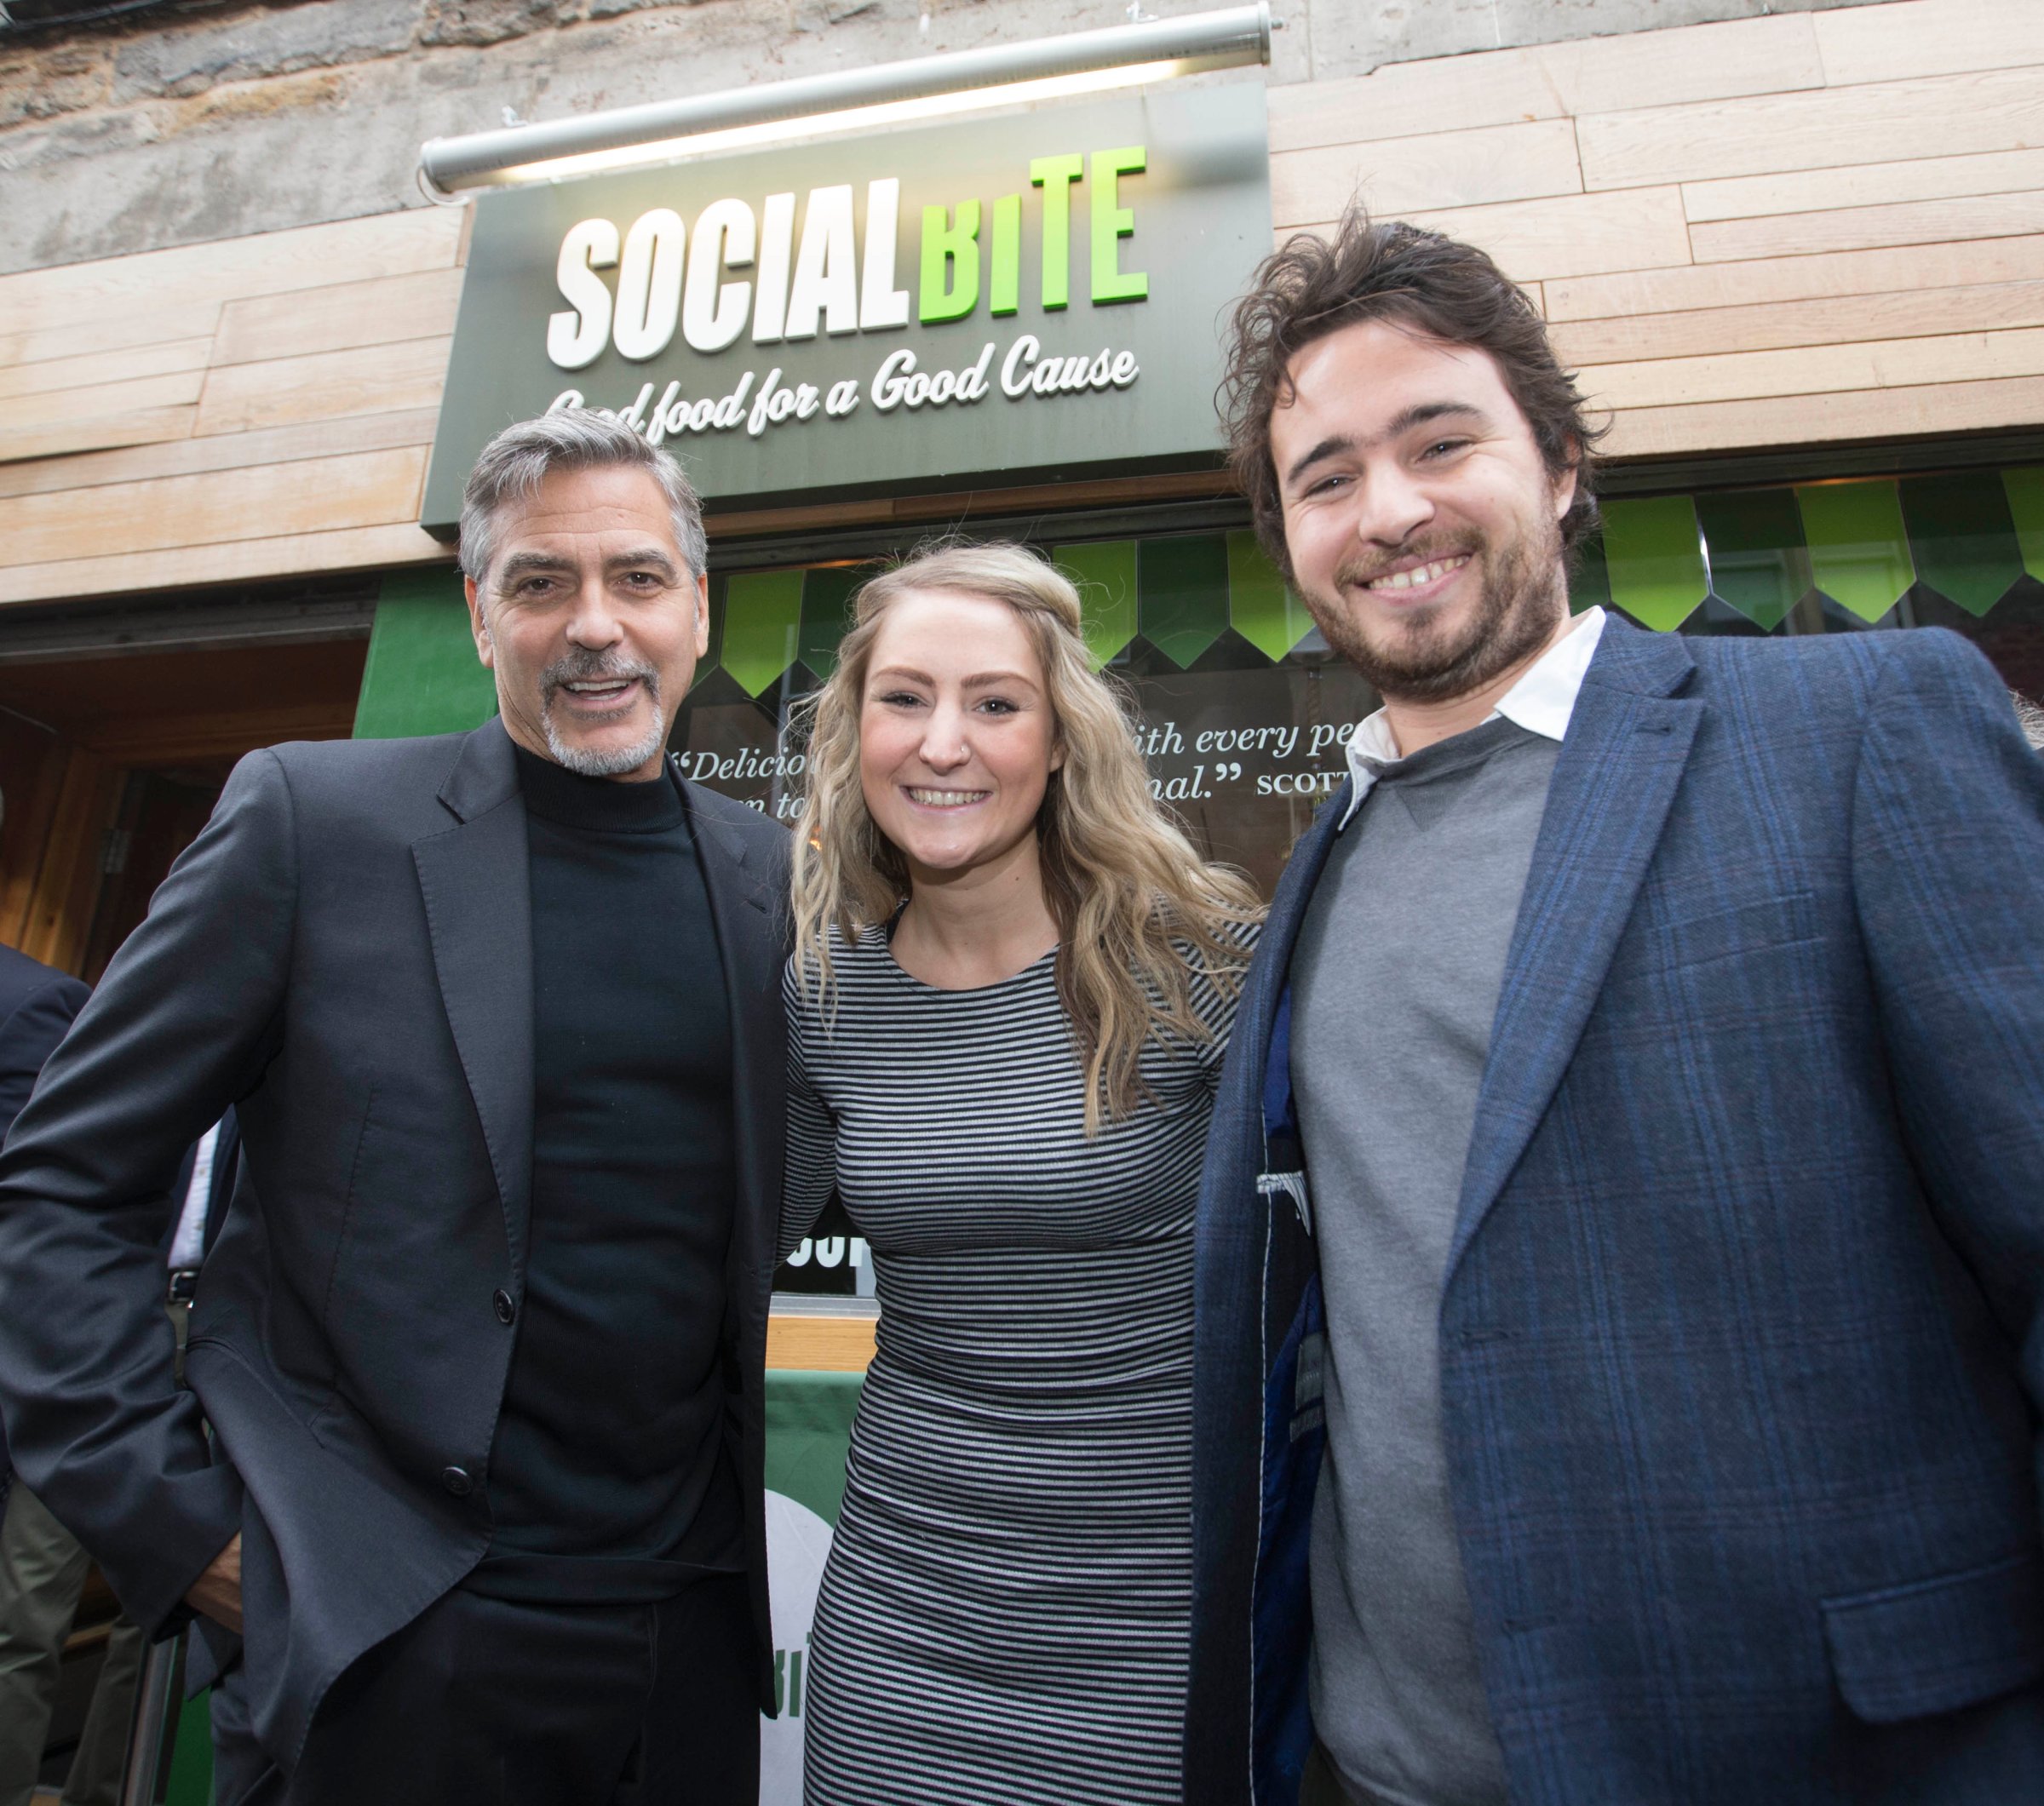 From left: George Clooney, and Social Bite co-founders Alice Thompson and Josh Littlejohn in Edinburgh, Scotland on Nov. 12, 2015.